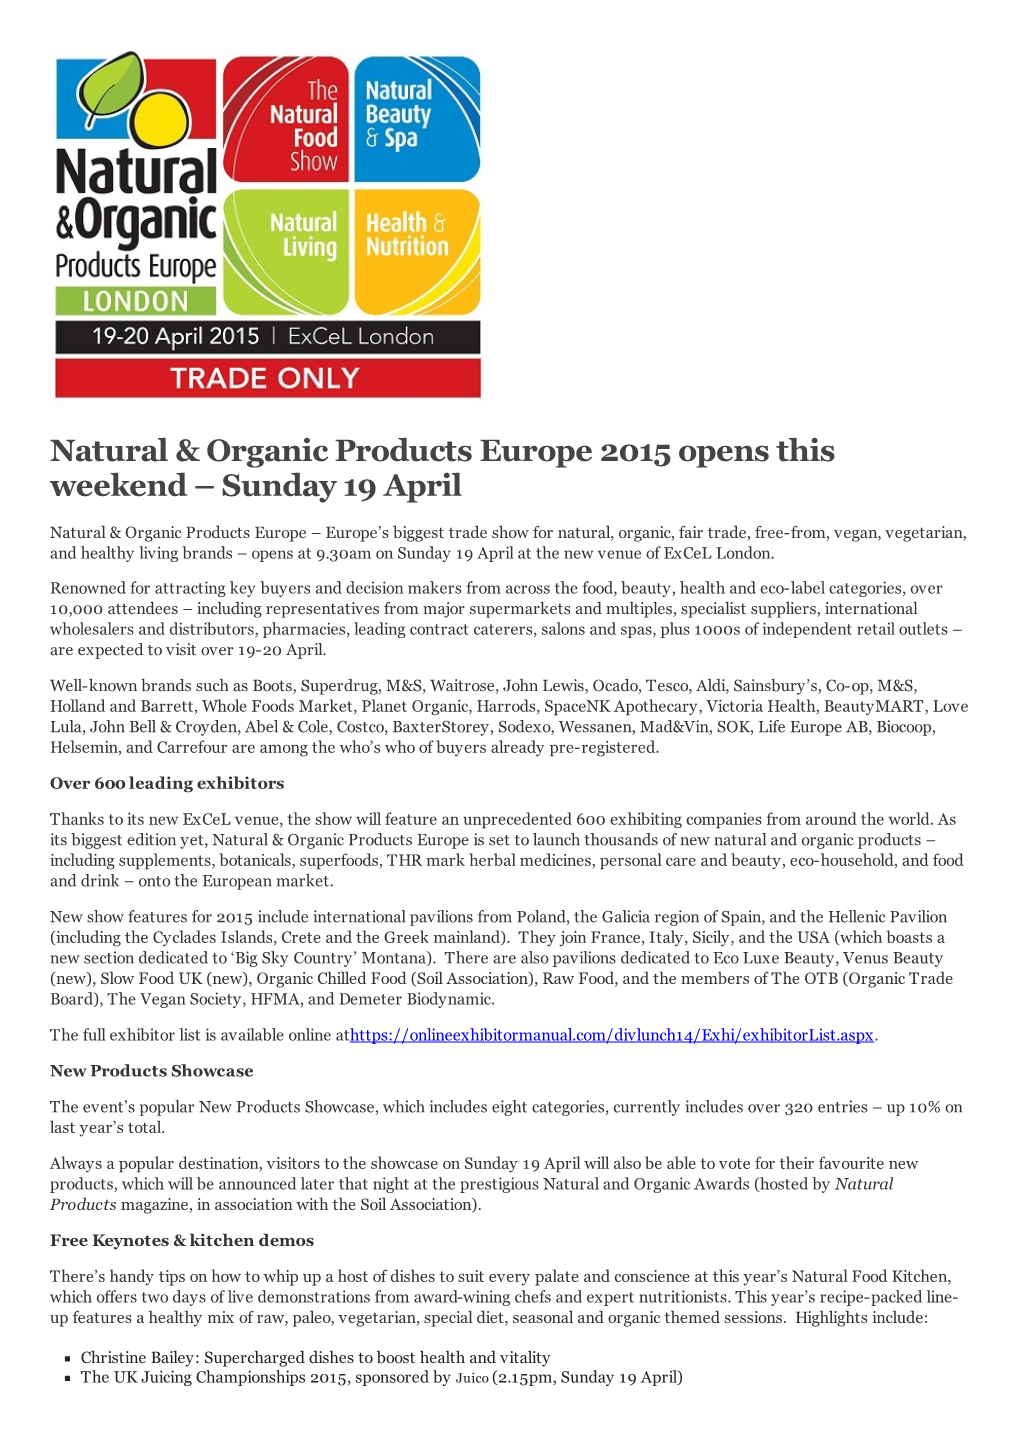 Natural & Organic Products Europe 2015 Opens This Weekend